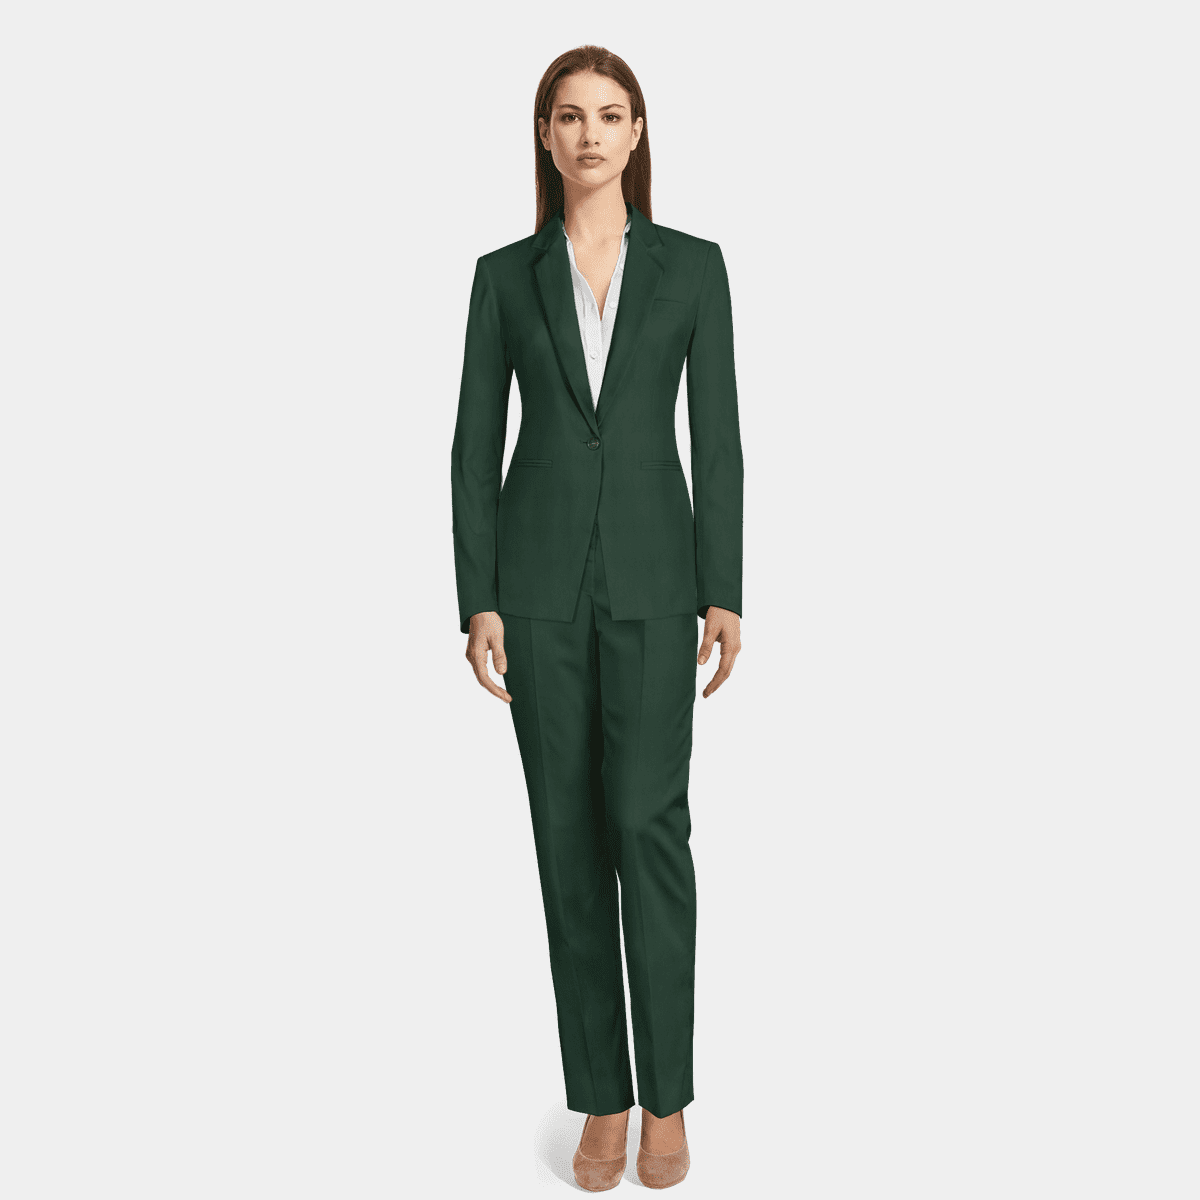 Green wool blend Pant Suit